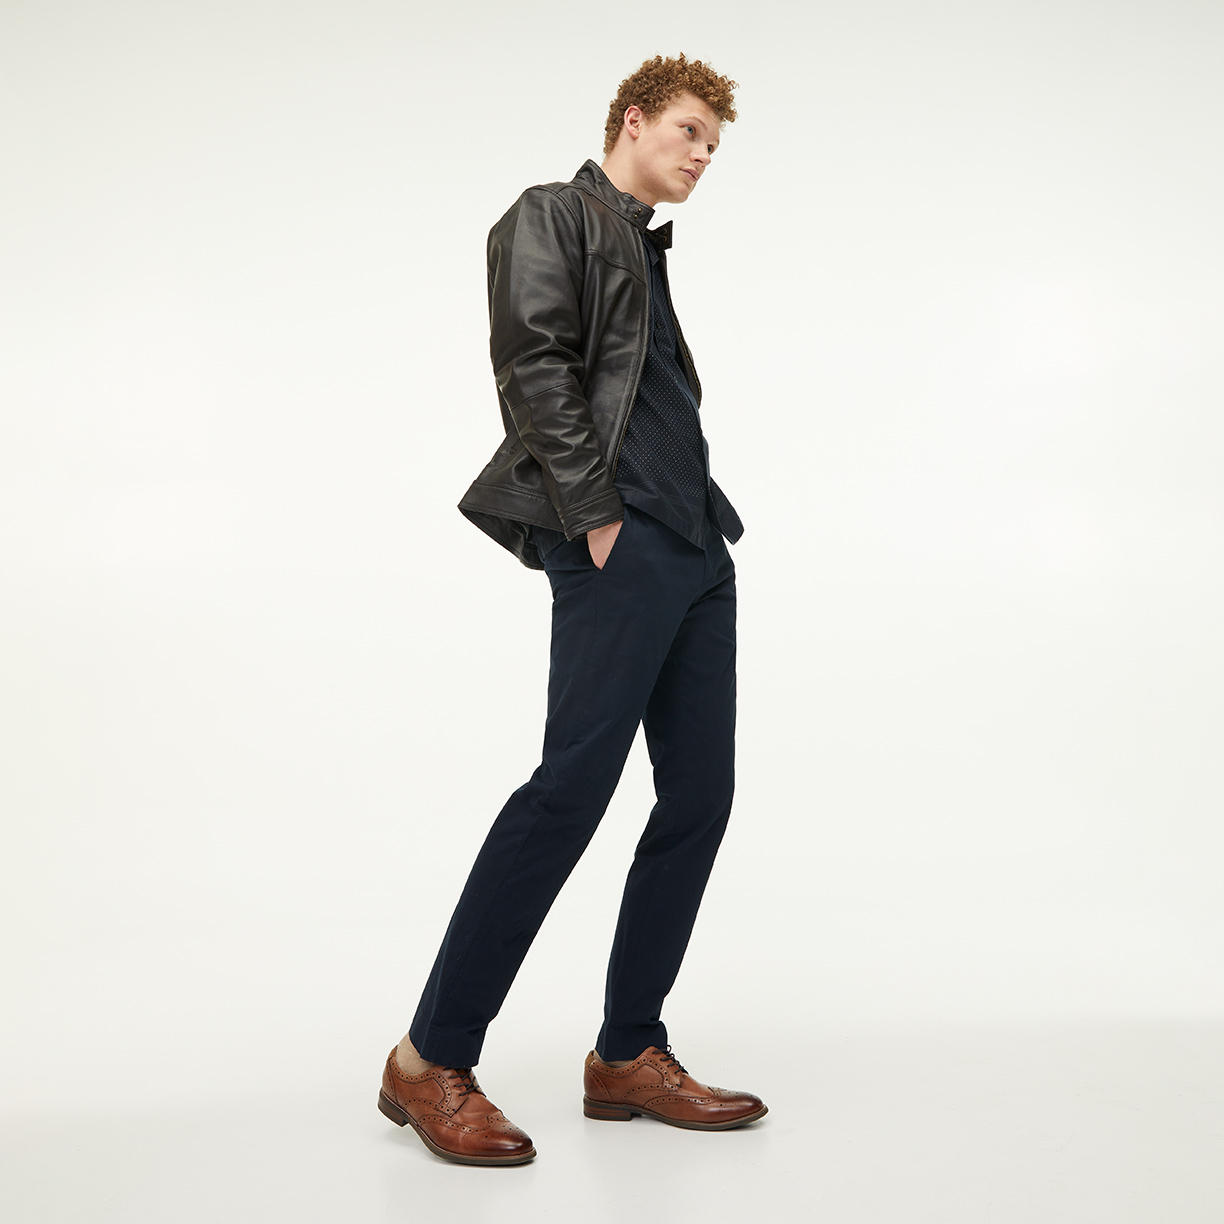 Men's Contemporary Spring Styles Up to 60% Off